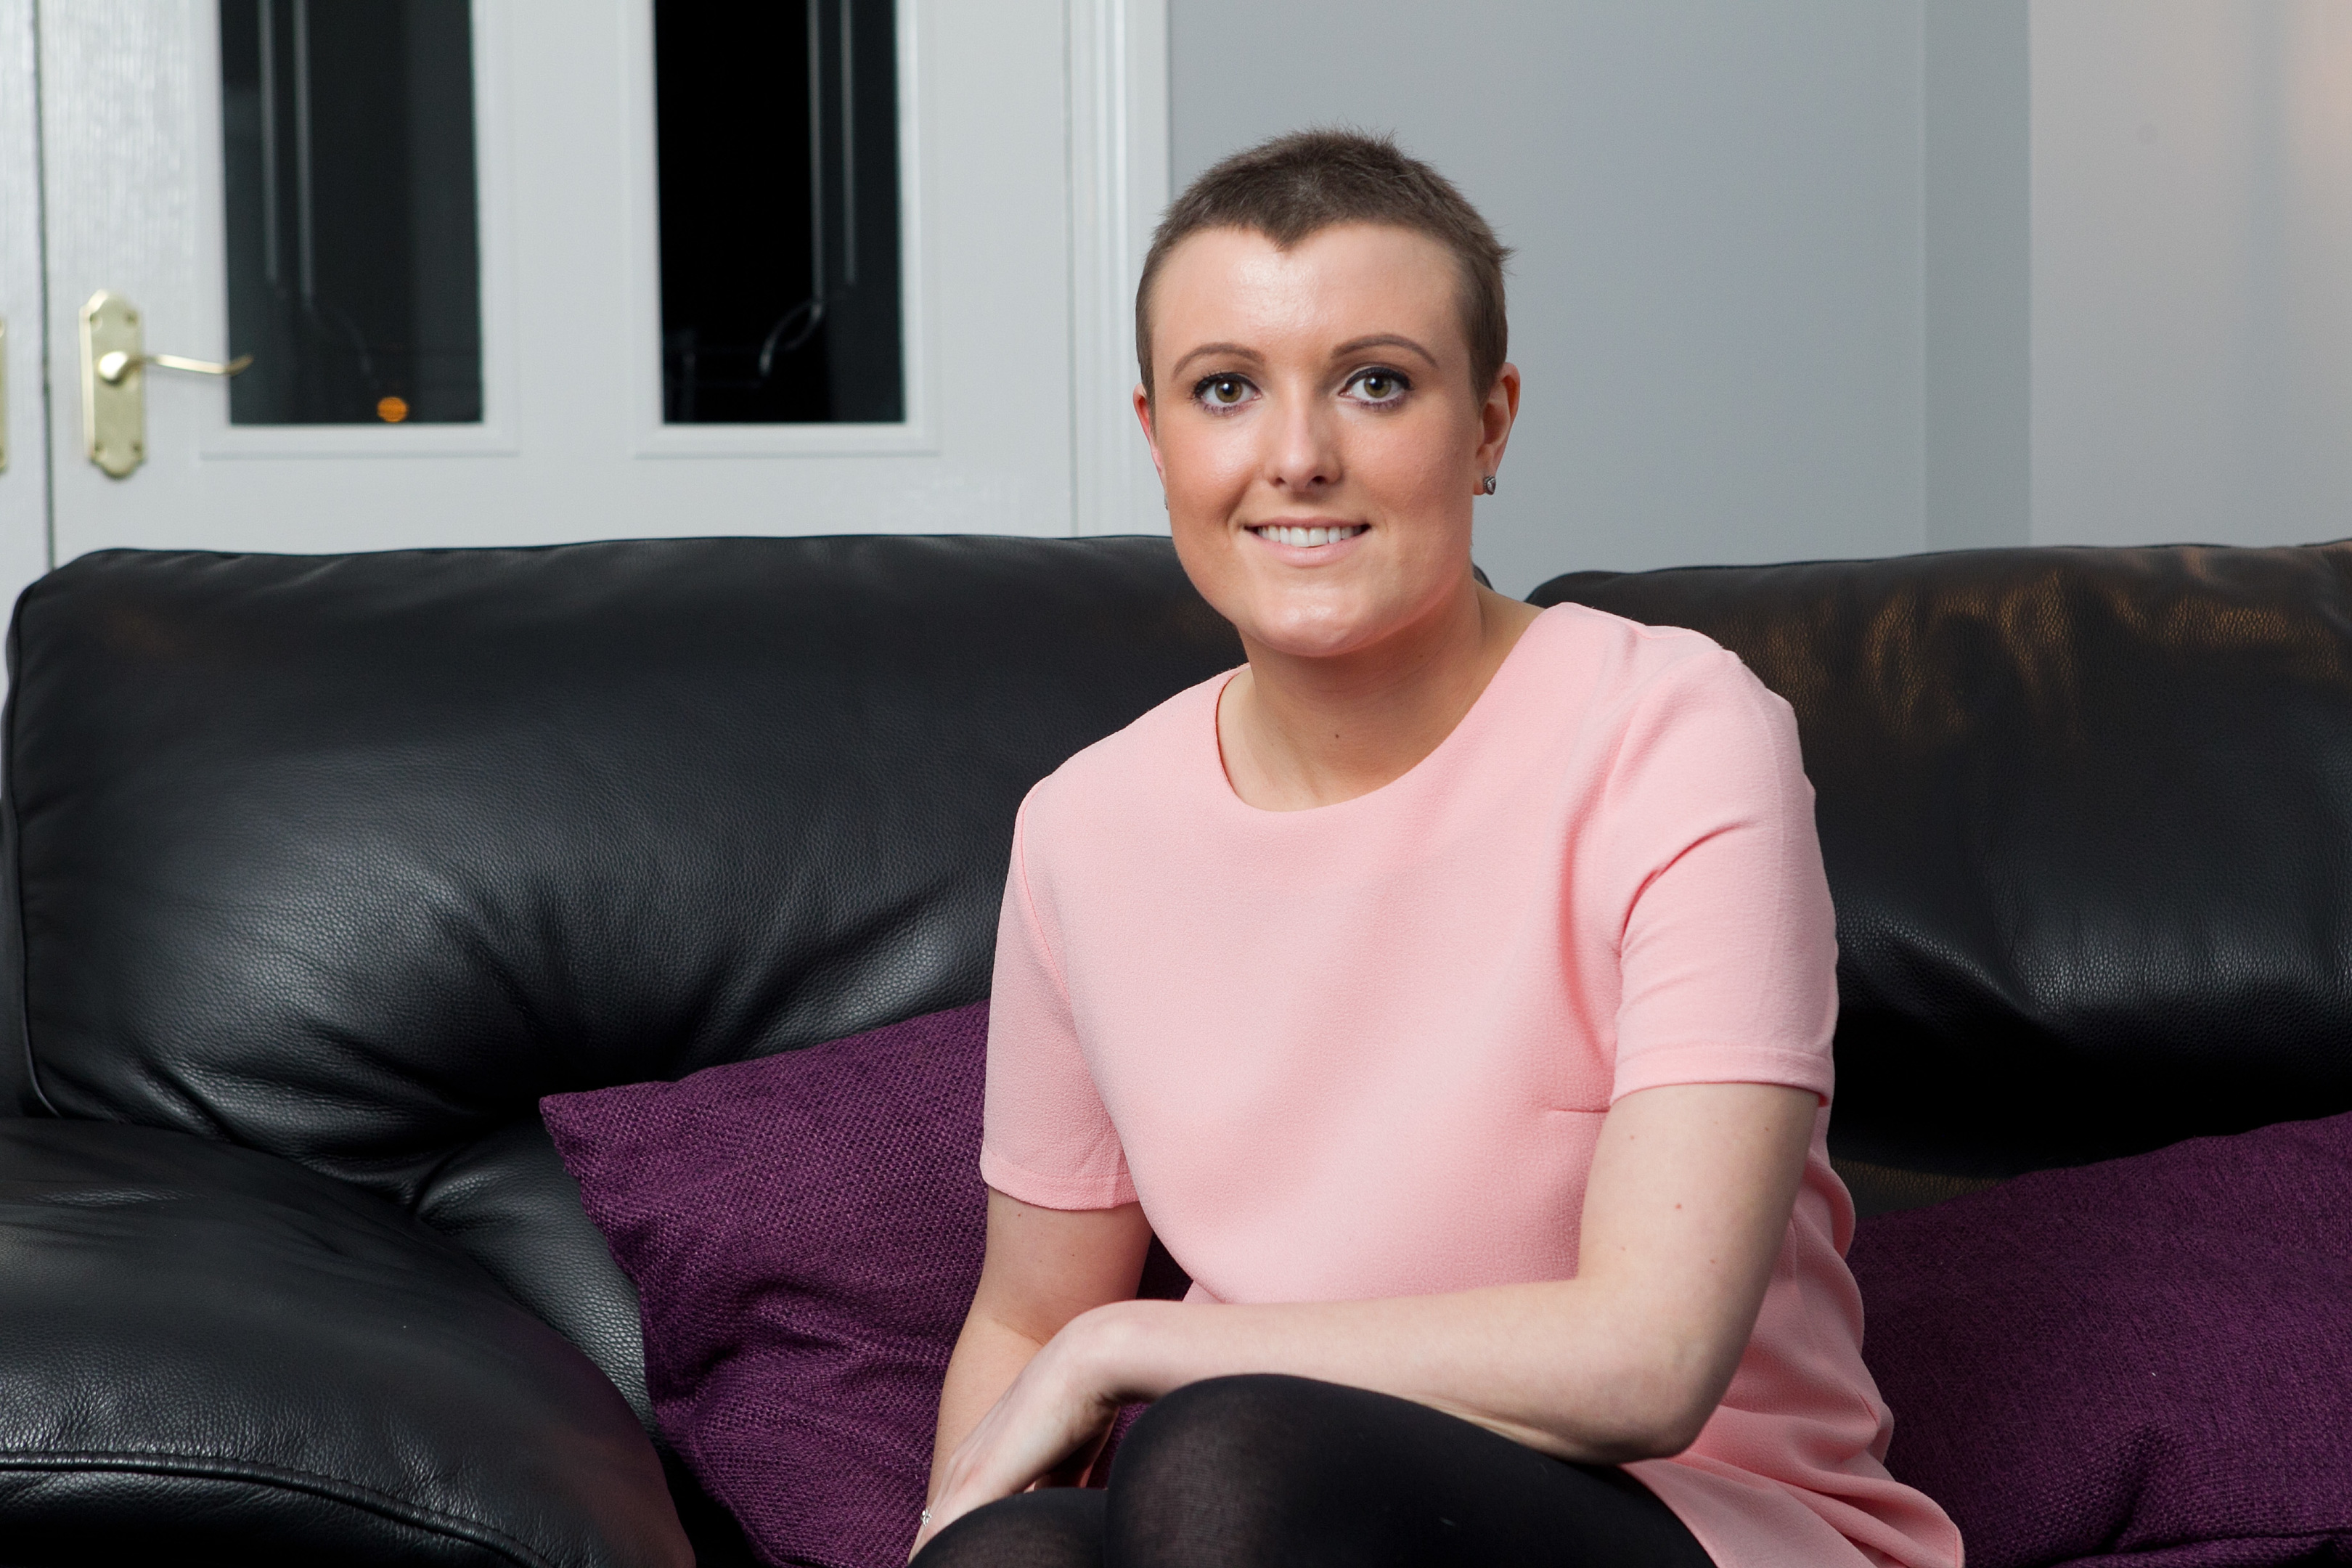 A hormone in Mandy's cancer treatment, tamoxifen, means her body mimics the menopause (Andrew Cawley/ DC Thomson)